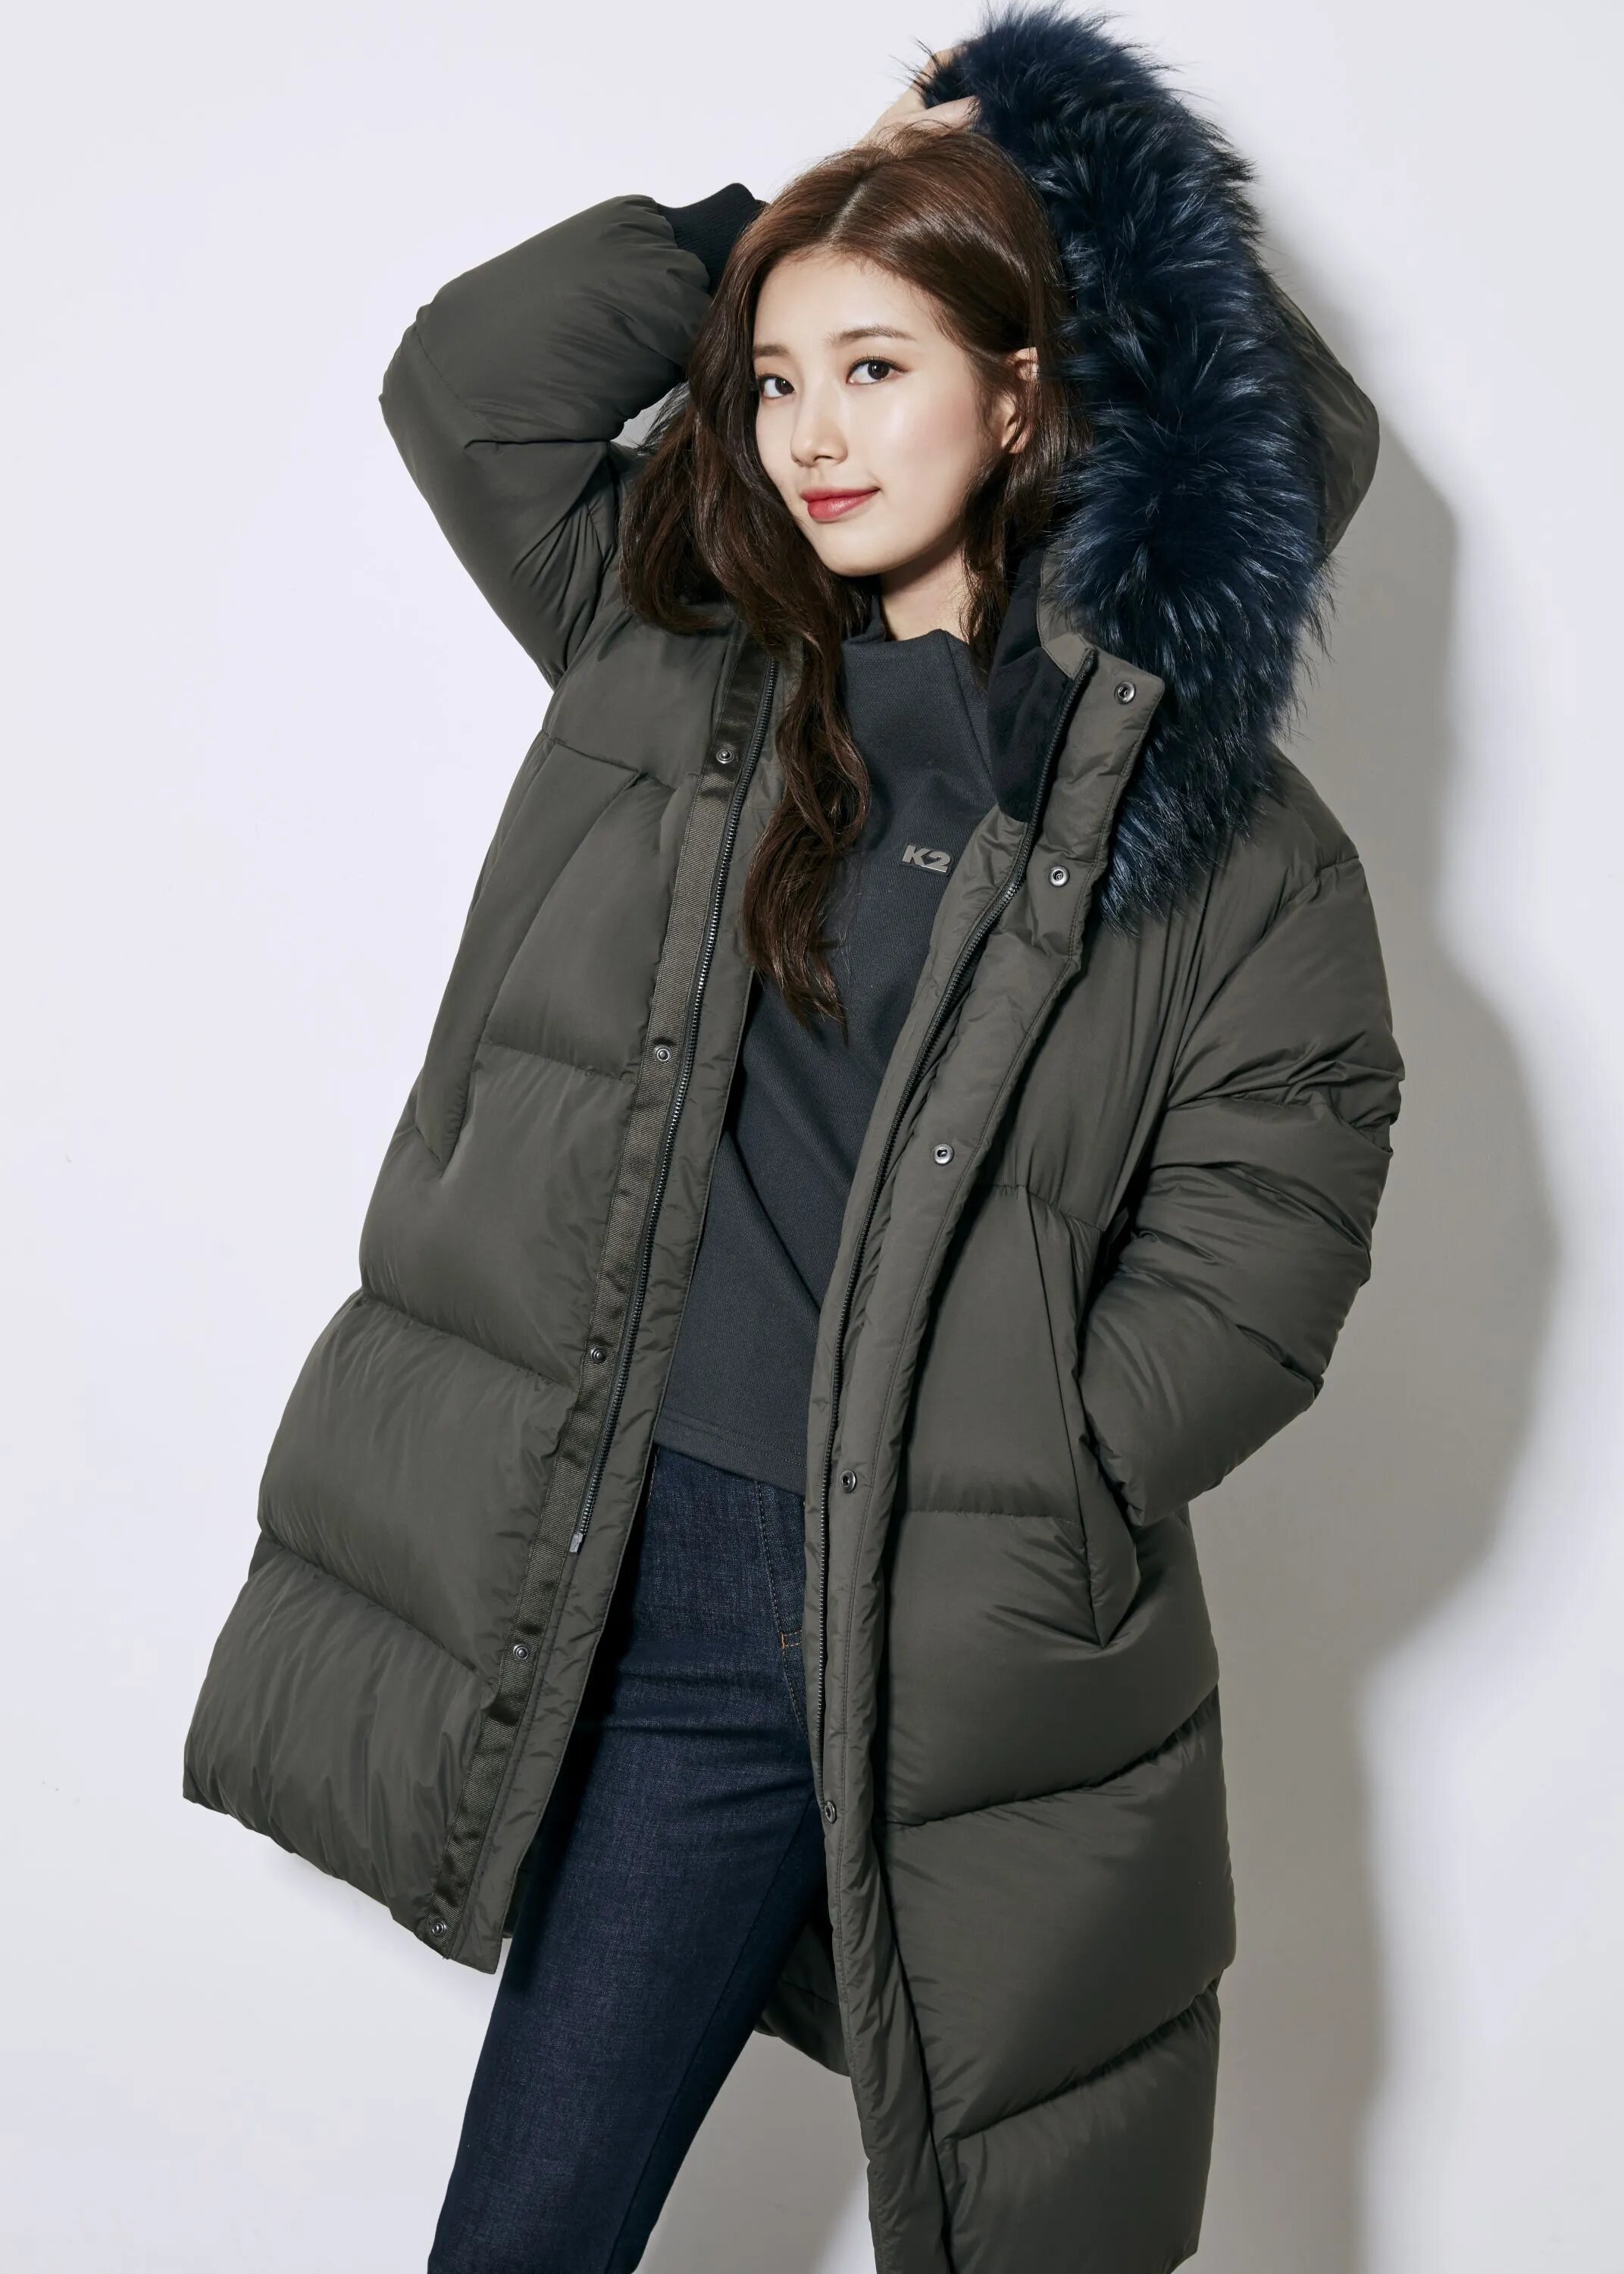 Suzy for K2 2018 fall/winter collection | kpopping